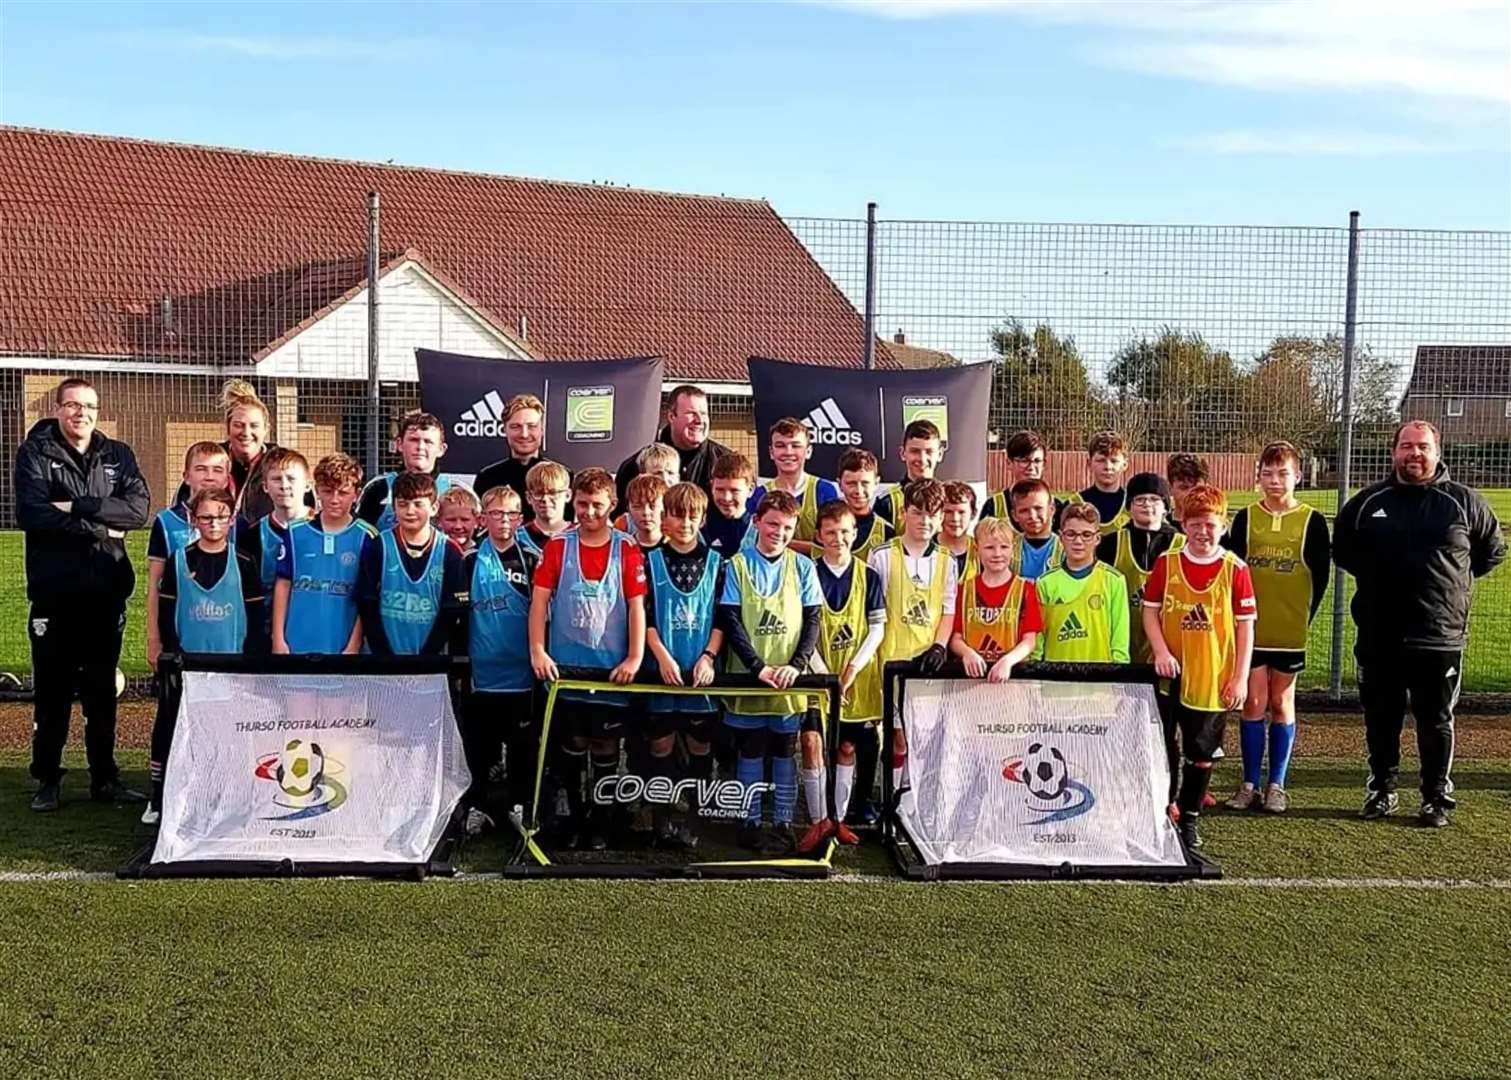 The 10-15 age group who took part in the two-day clinic with Coerver Coaching and Thurso Football Academy.